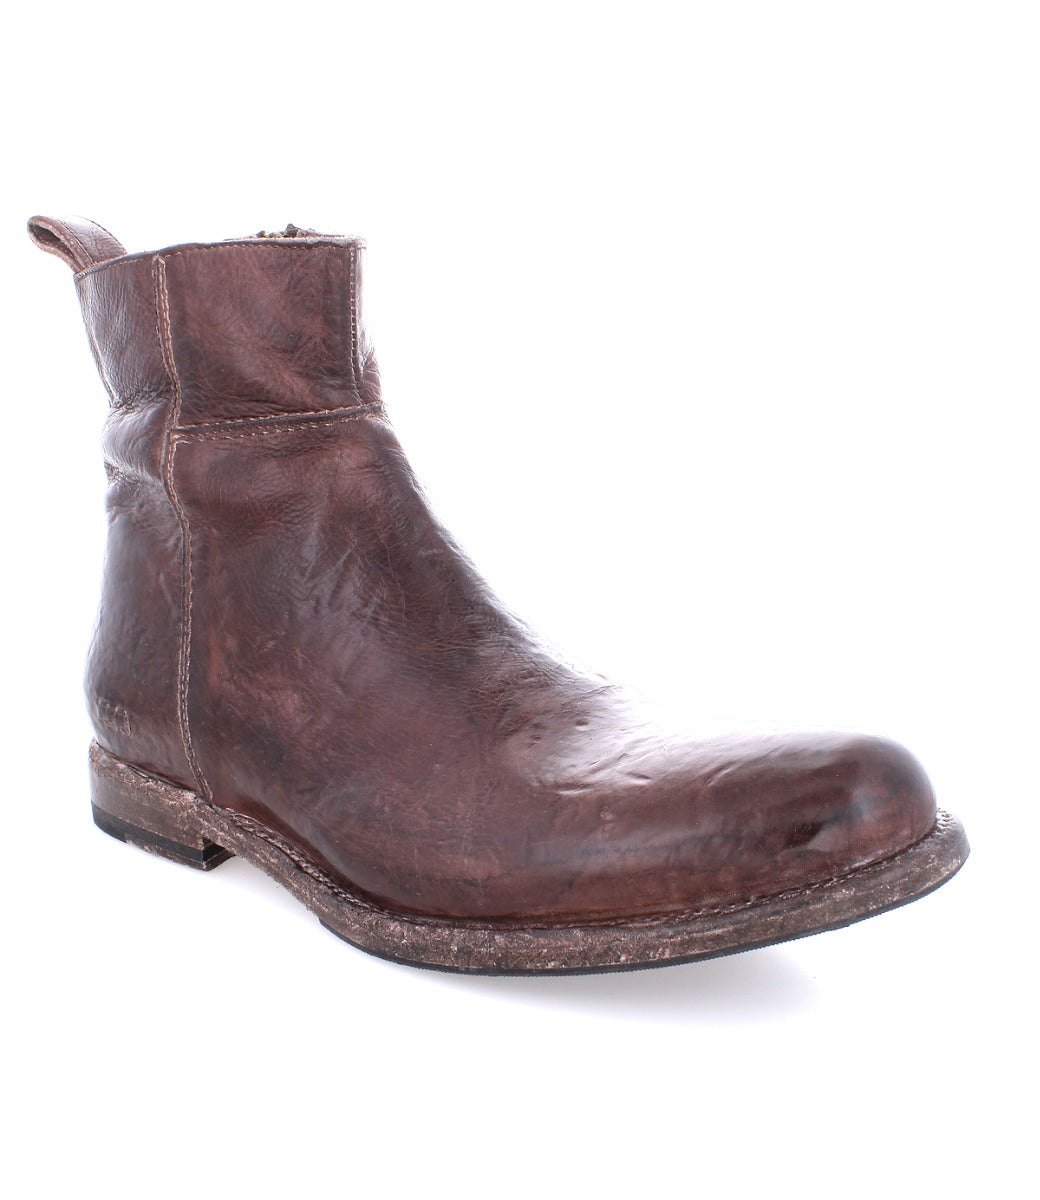 A single worn brown leather ankle boot with a distressed finish and a low heel, isolated on a white background. (Kaldi by Bed Stu)